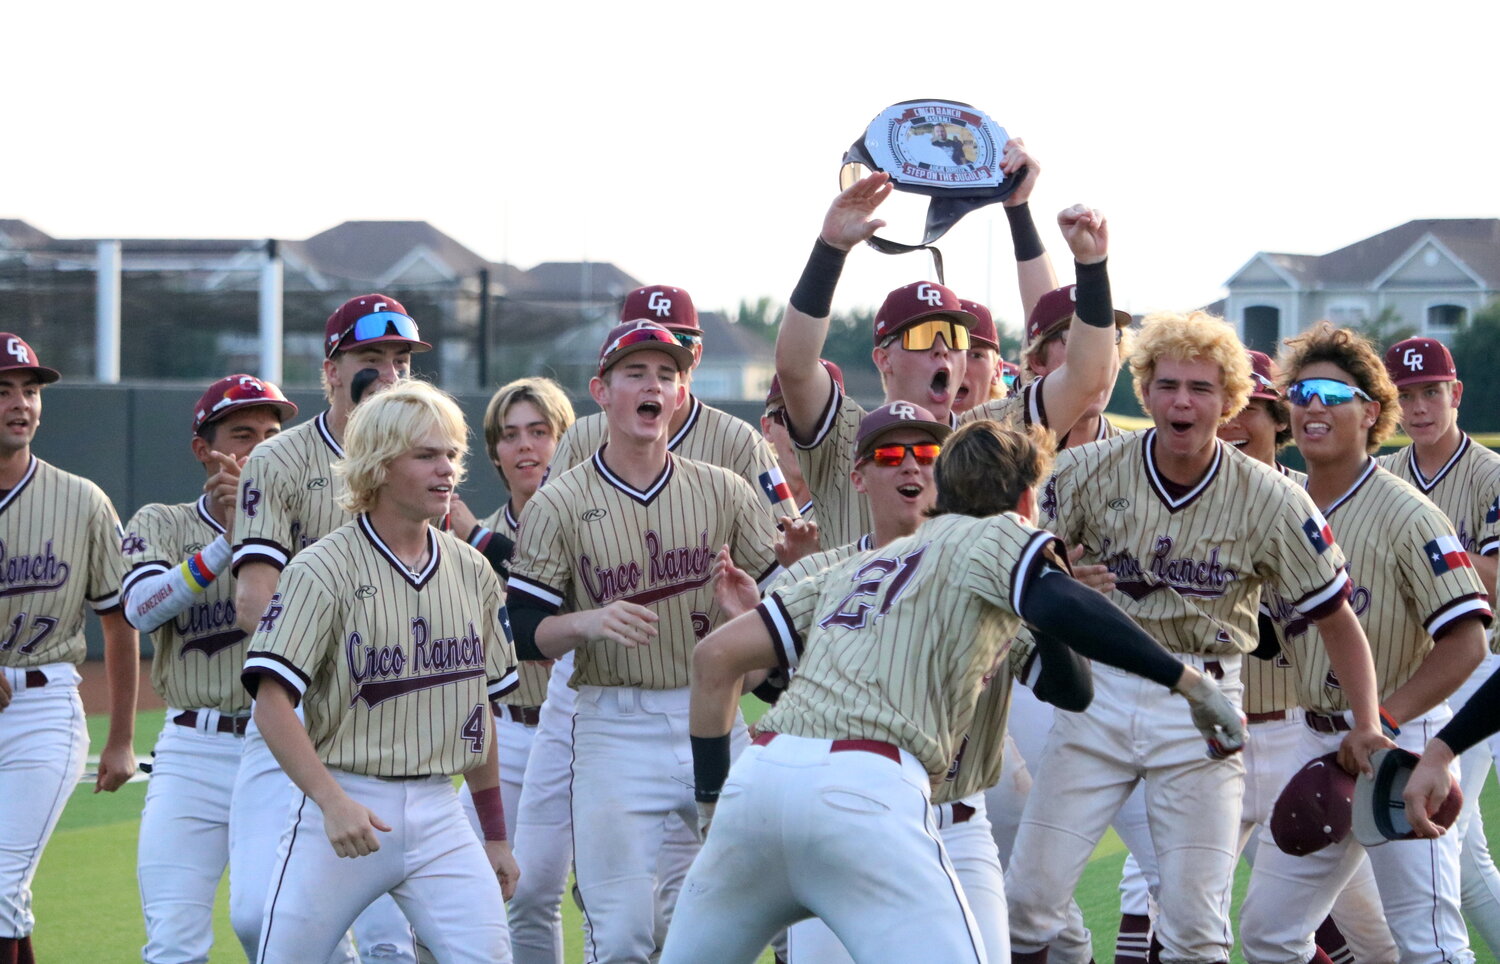 Cinco Ranch players celebrate after a Charlie Atkinson home run during Friday's Regional Quarterfinal between Cinco Ranch and Ridge Point at Langham Creek.